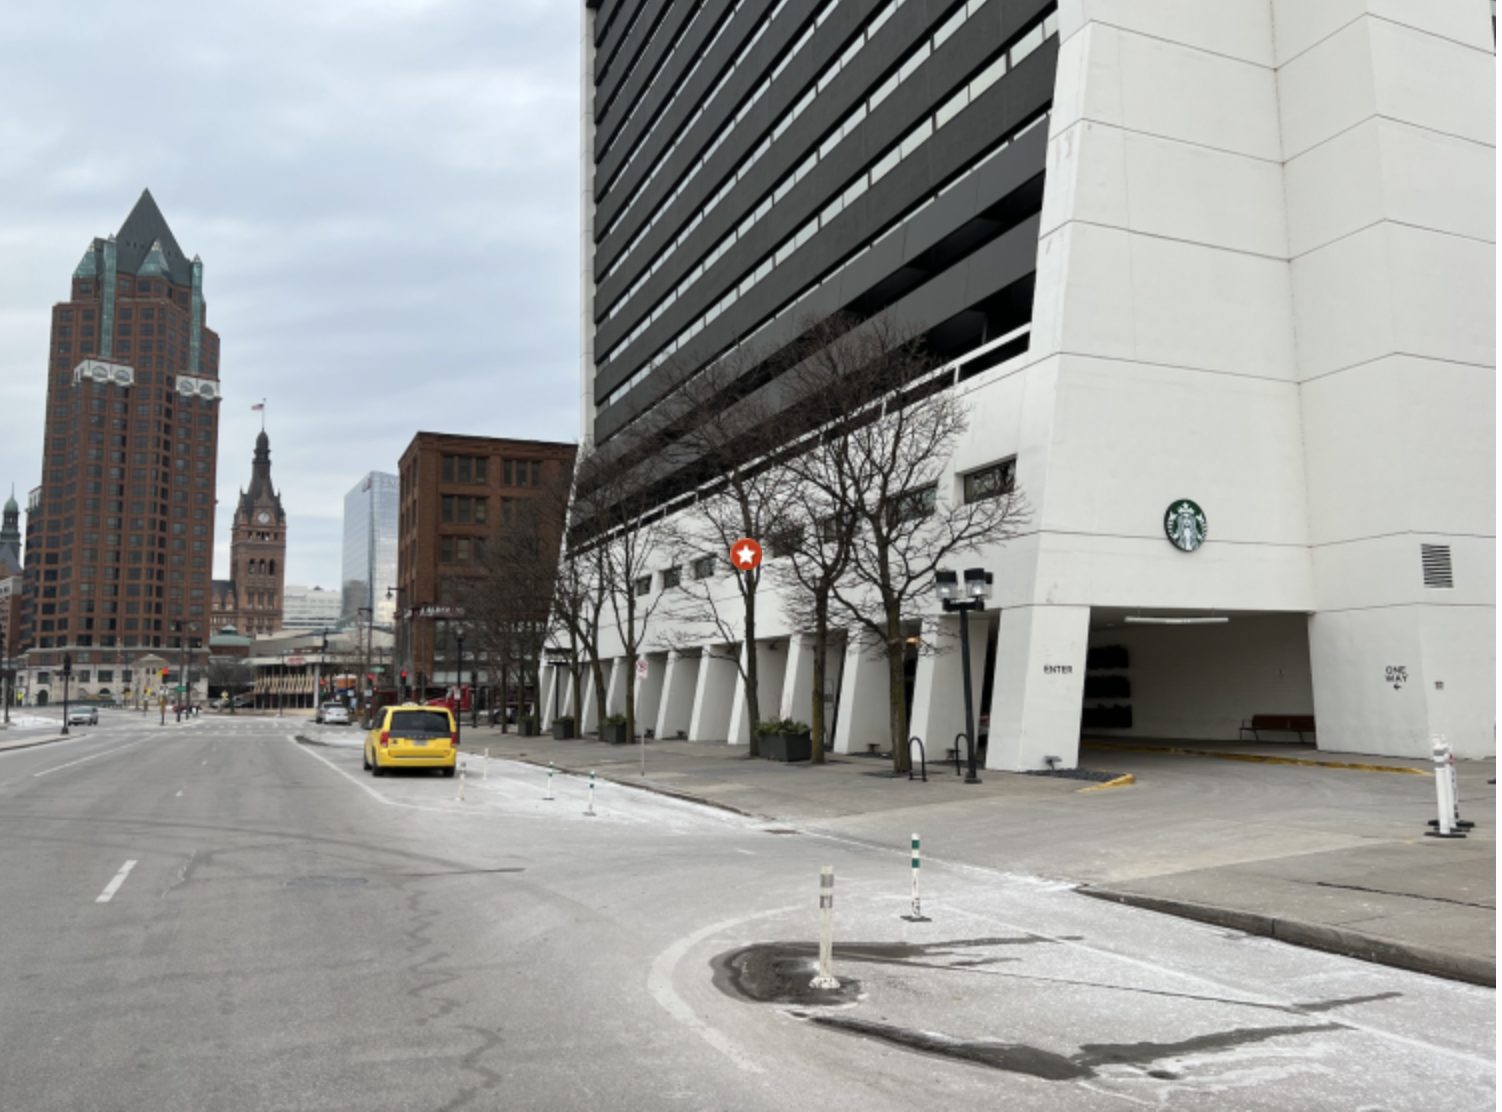 UW-Milwaukee Panther Arena - Headed to the Deer District tonight to watch  the Milwaukee Bucks in Game 2 of the NBA Finals? Parking is available in  our lot between Wells Street and